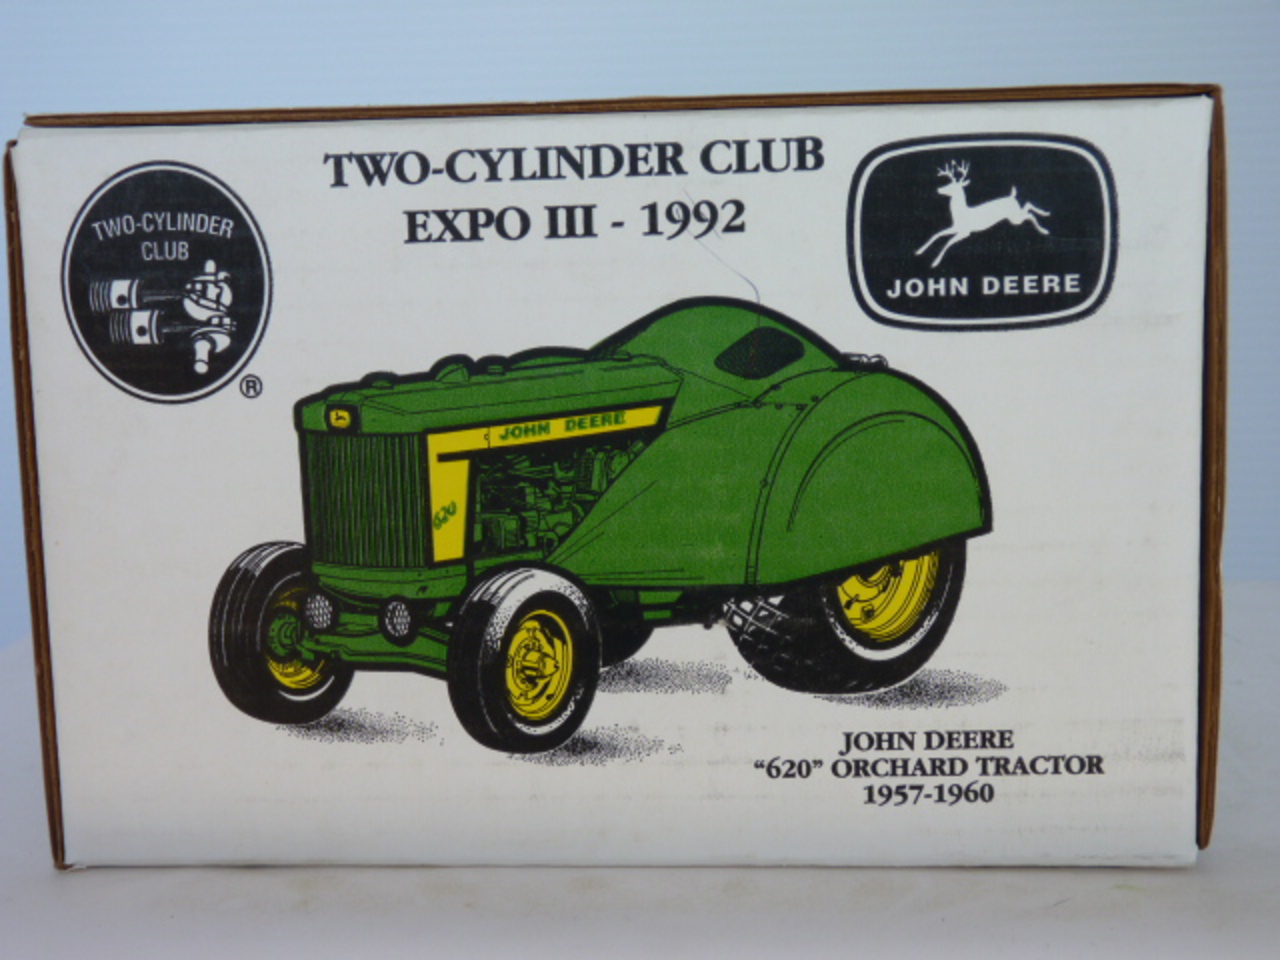 John Deere 620 Orchard Tractor Two-Cylinder Club Expo III | J and ...